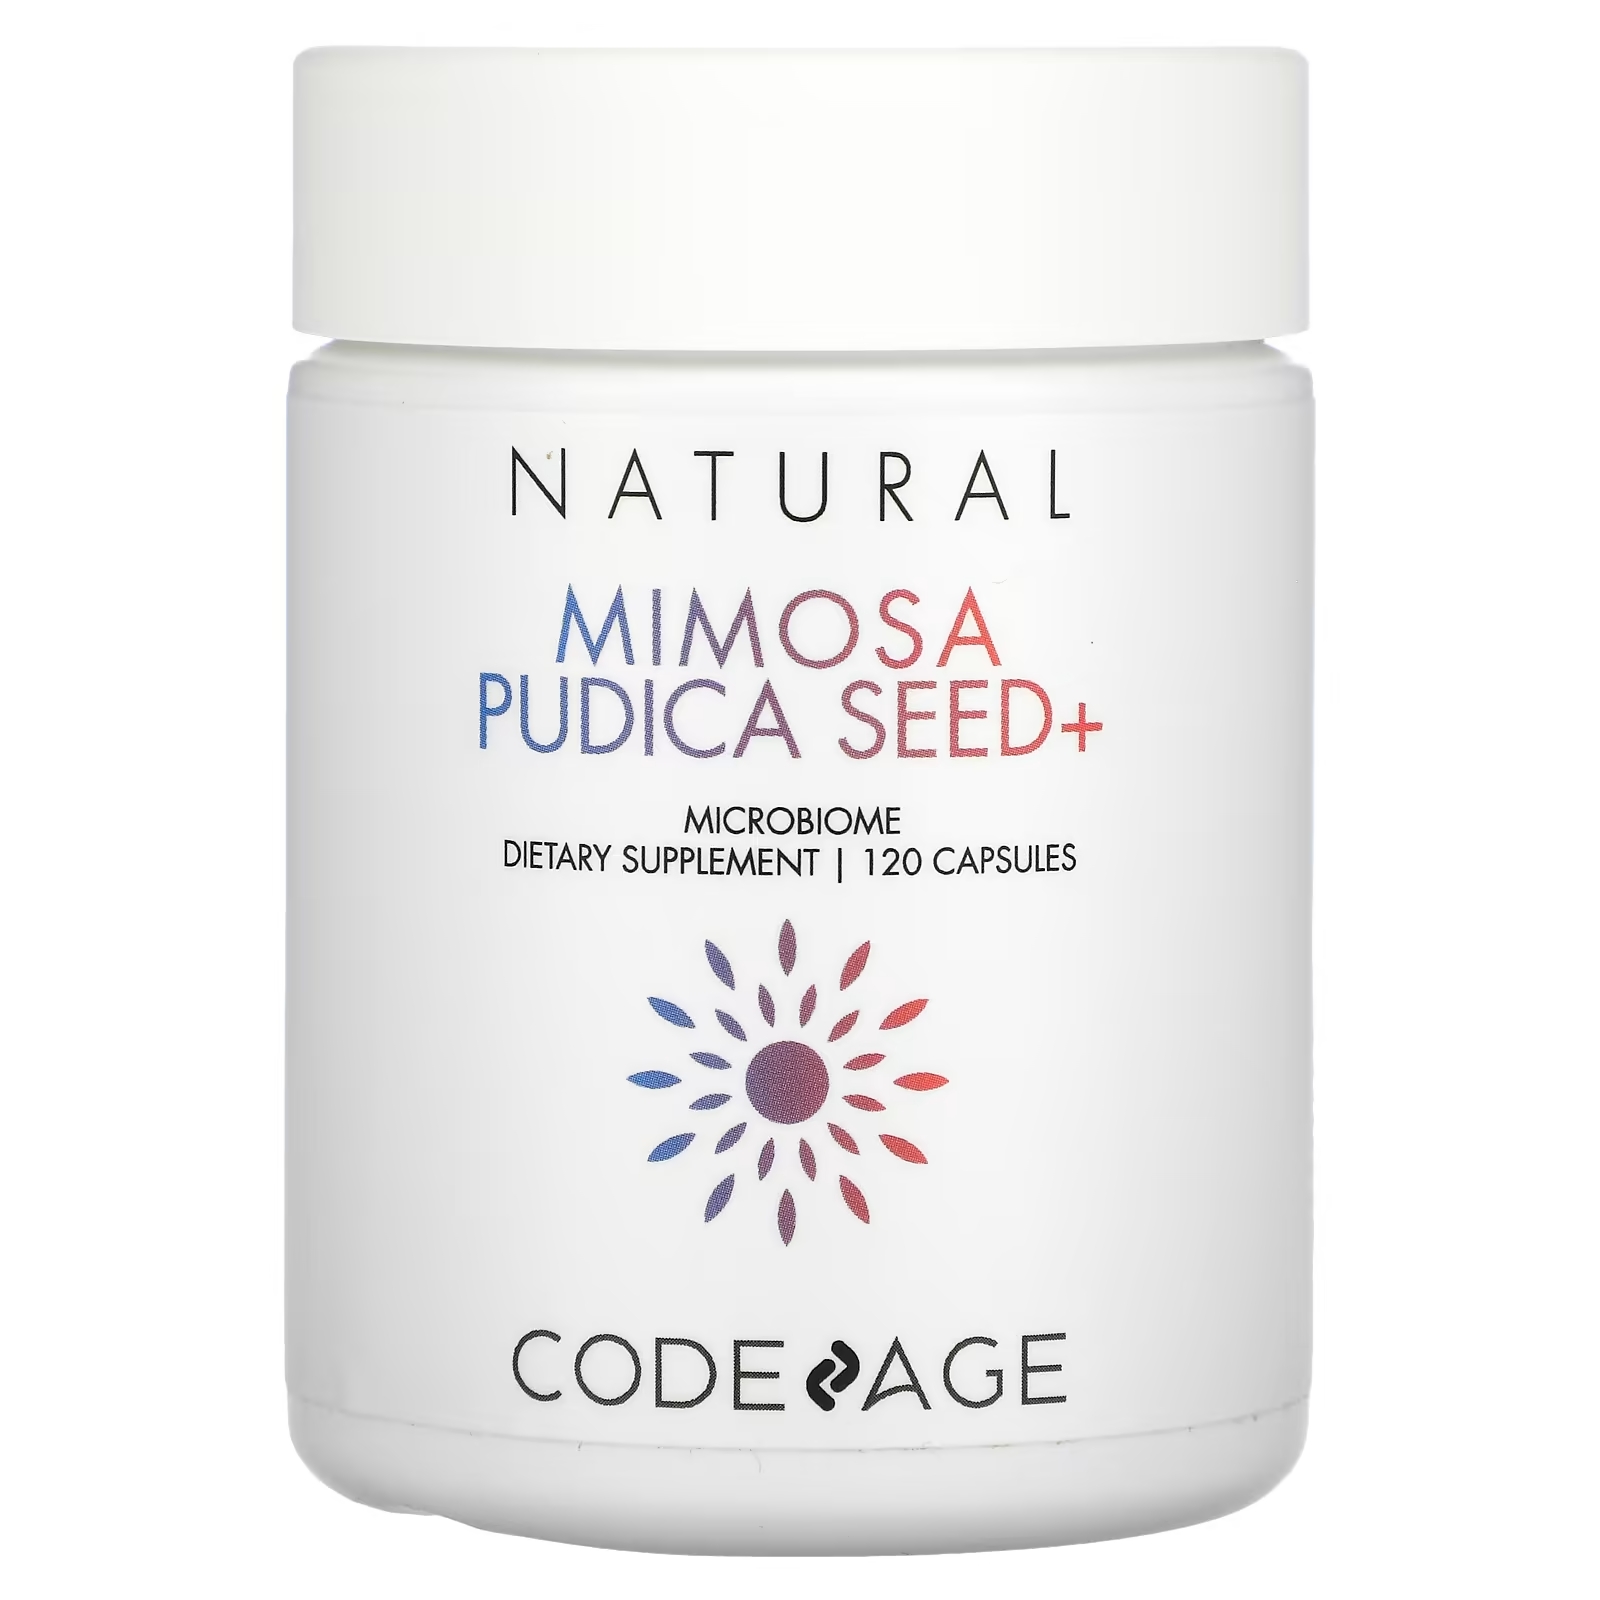 Codeage Mimosa Pudica Seed + Microbiome, 120 капсул codeage mimosa pudica seed 120 капсул